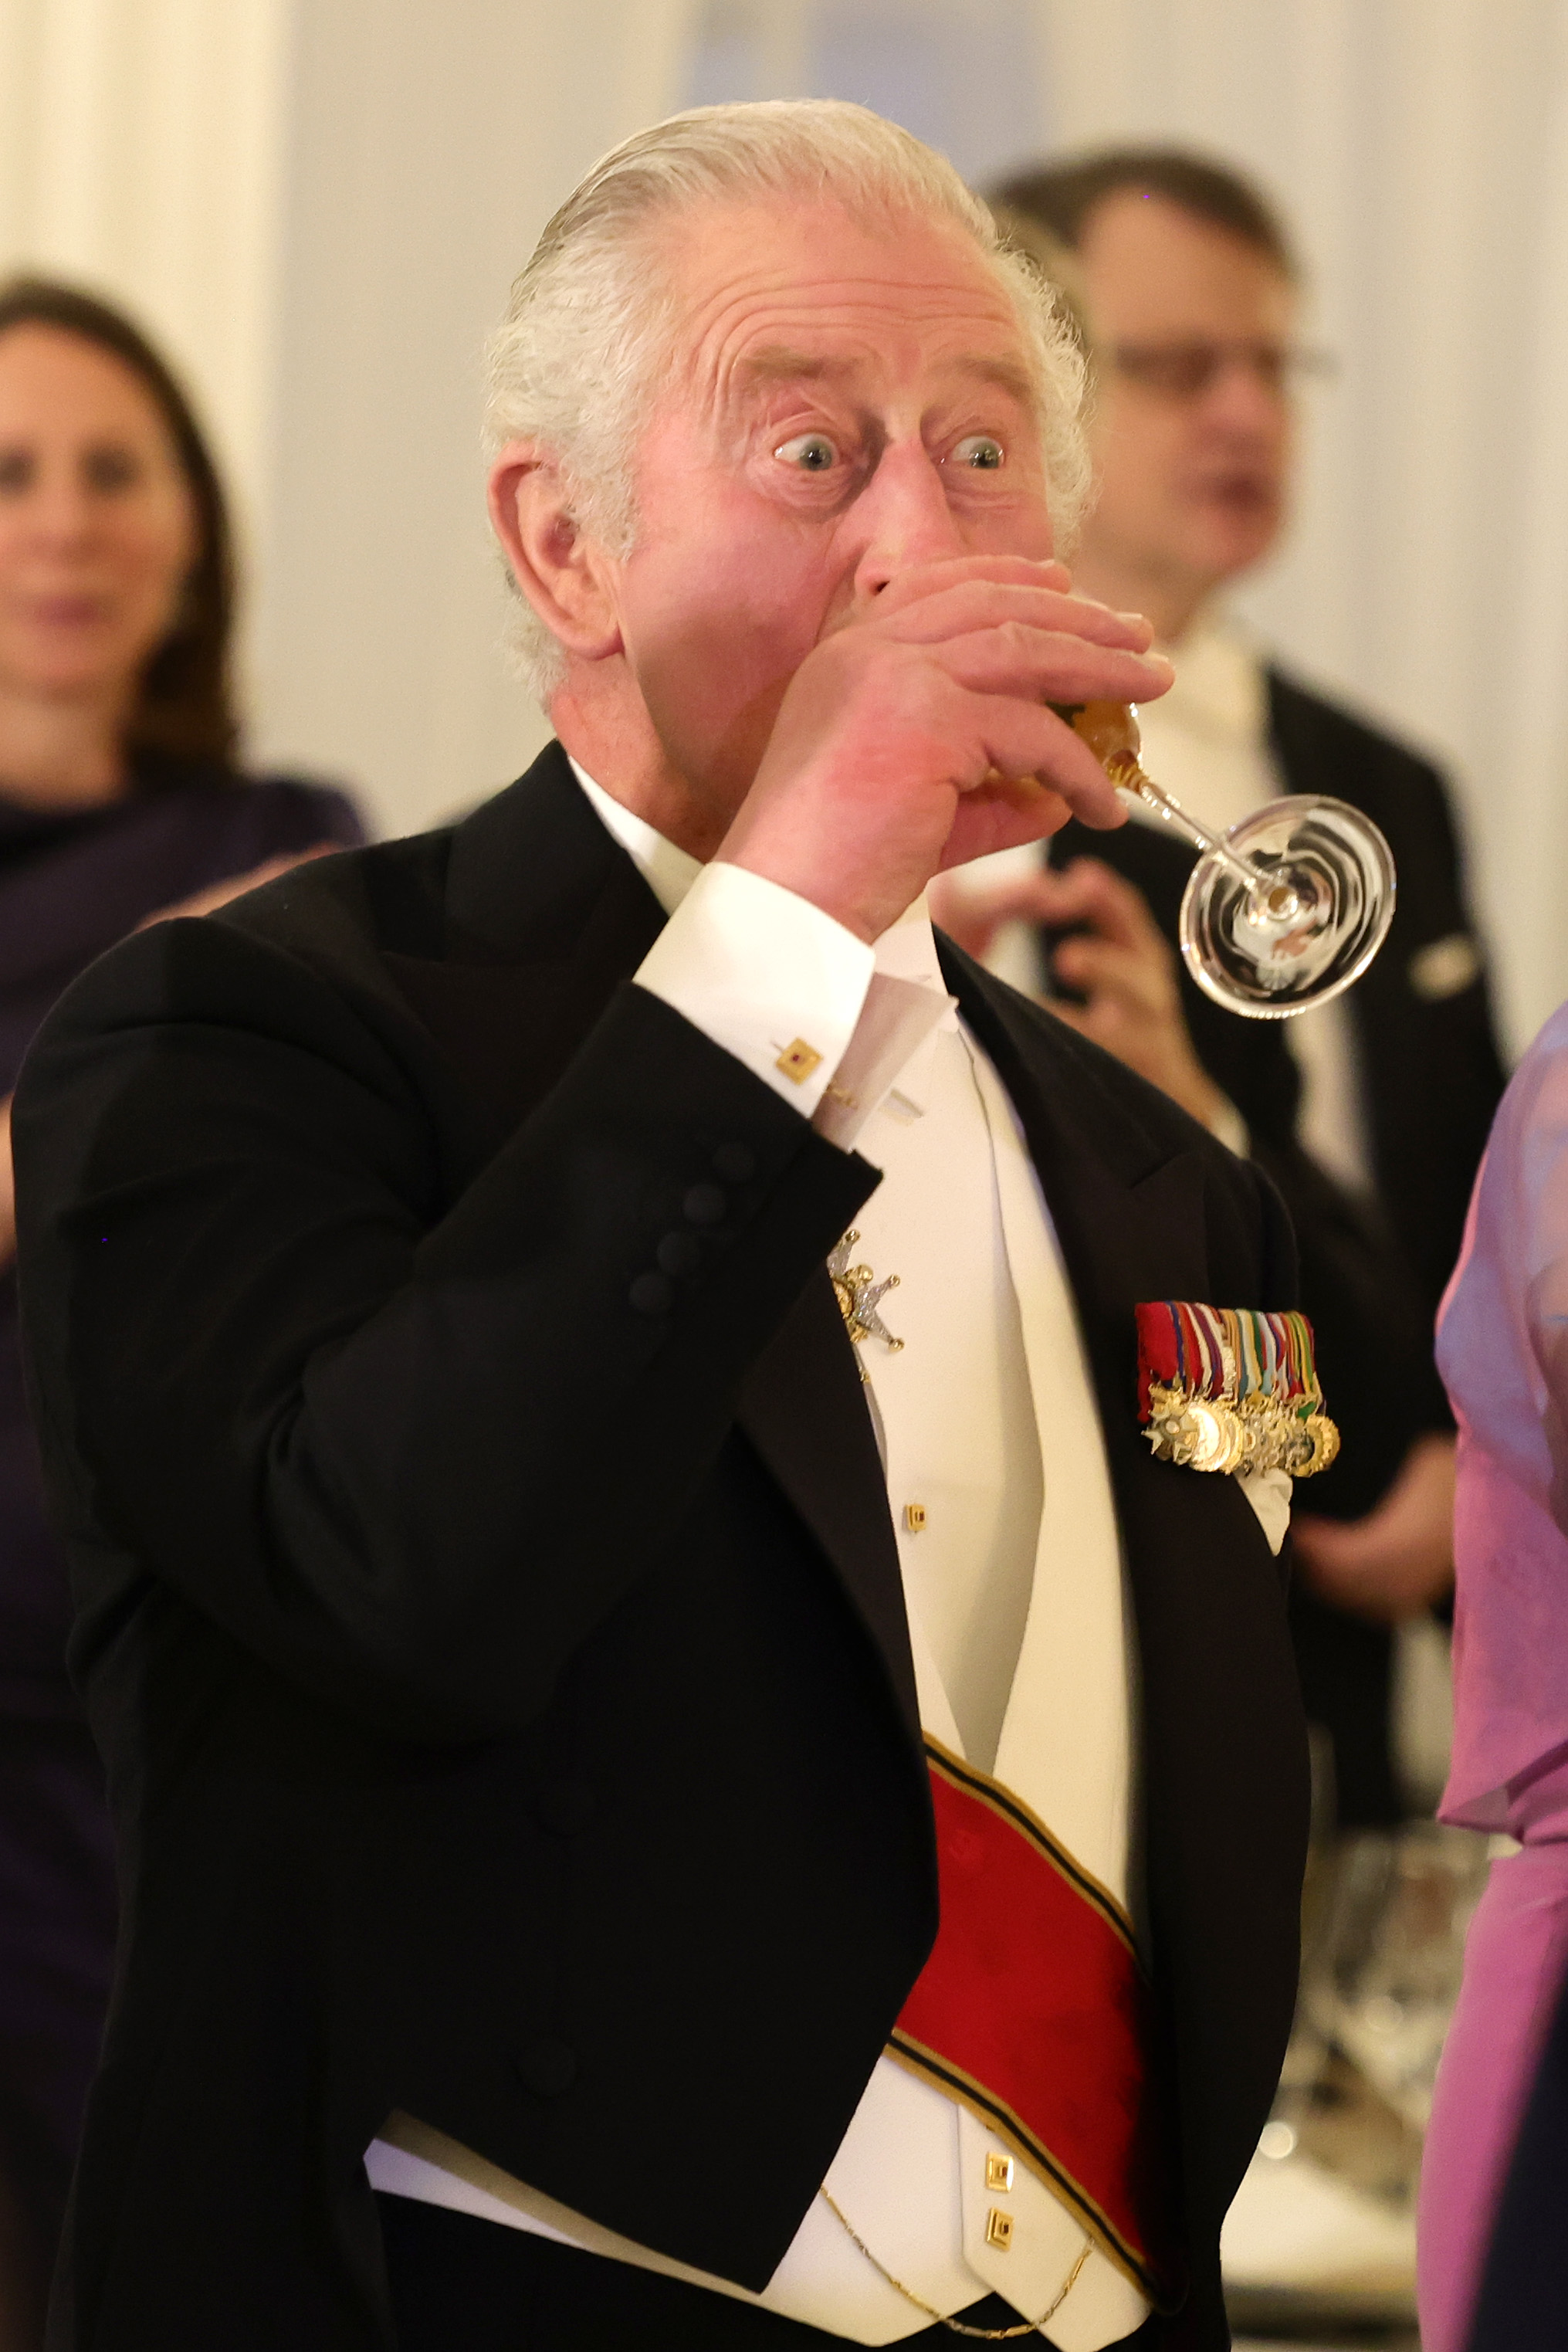 King Charles drinks from a Champagne flute during a state banquet at the Bellevue Palace